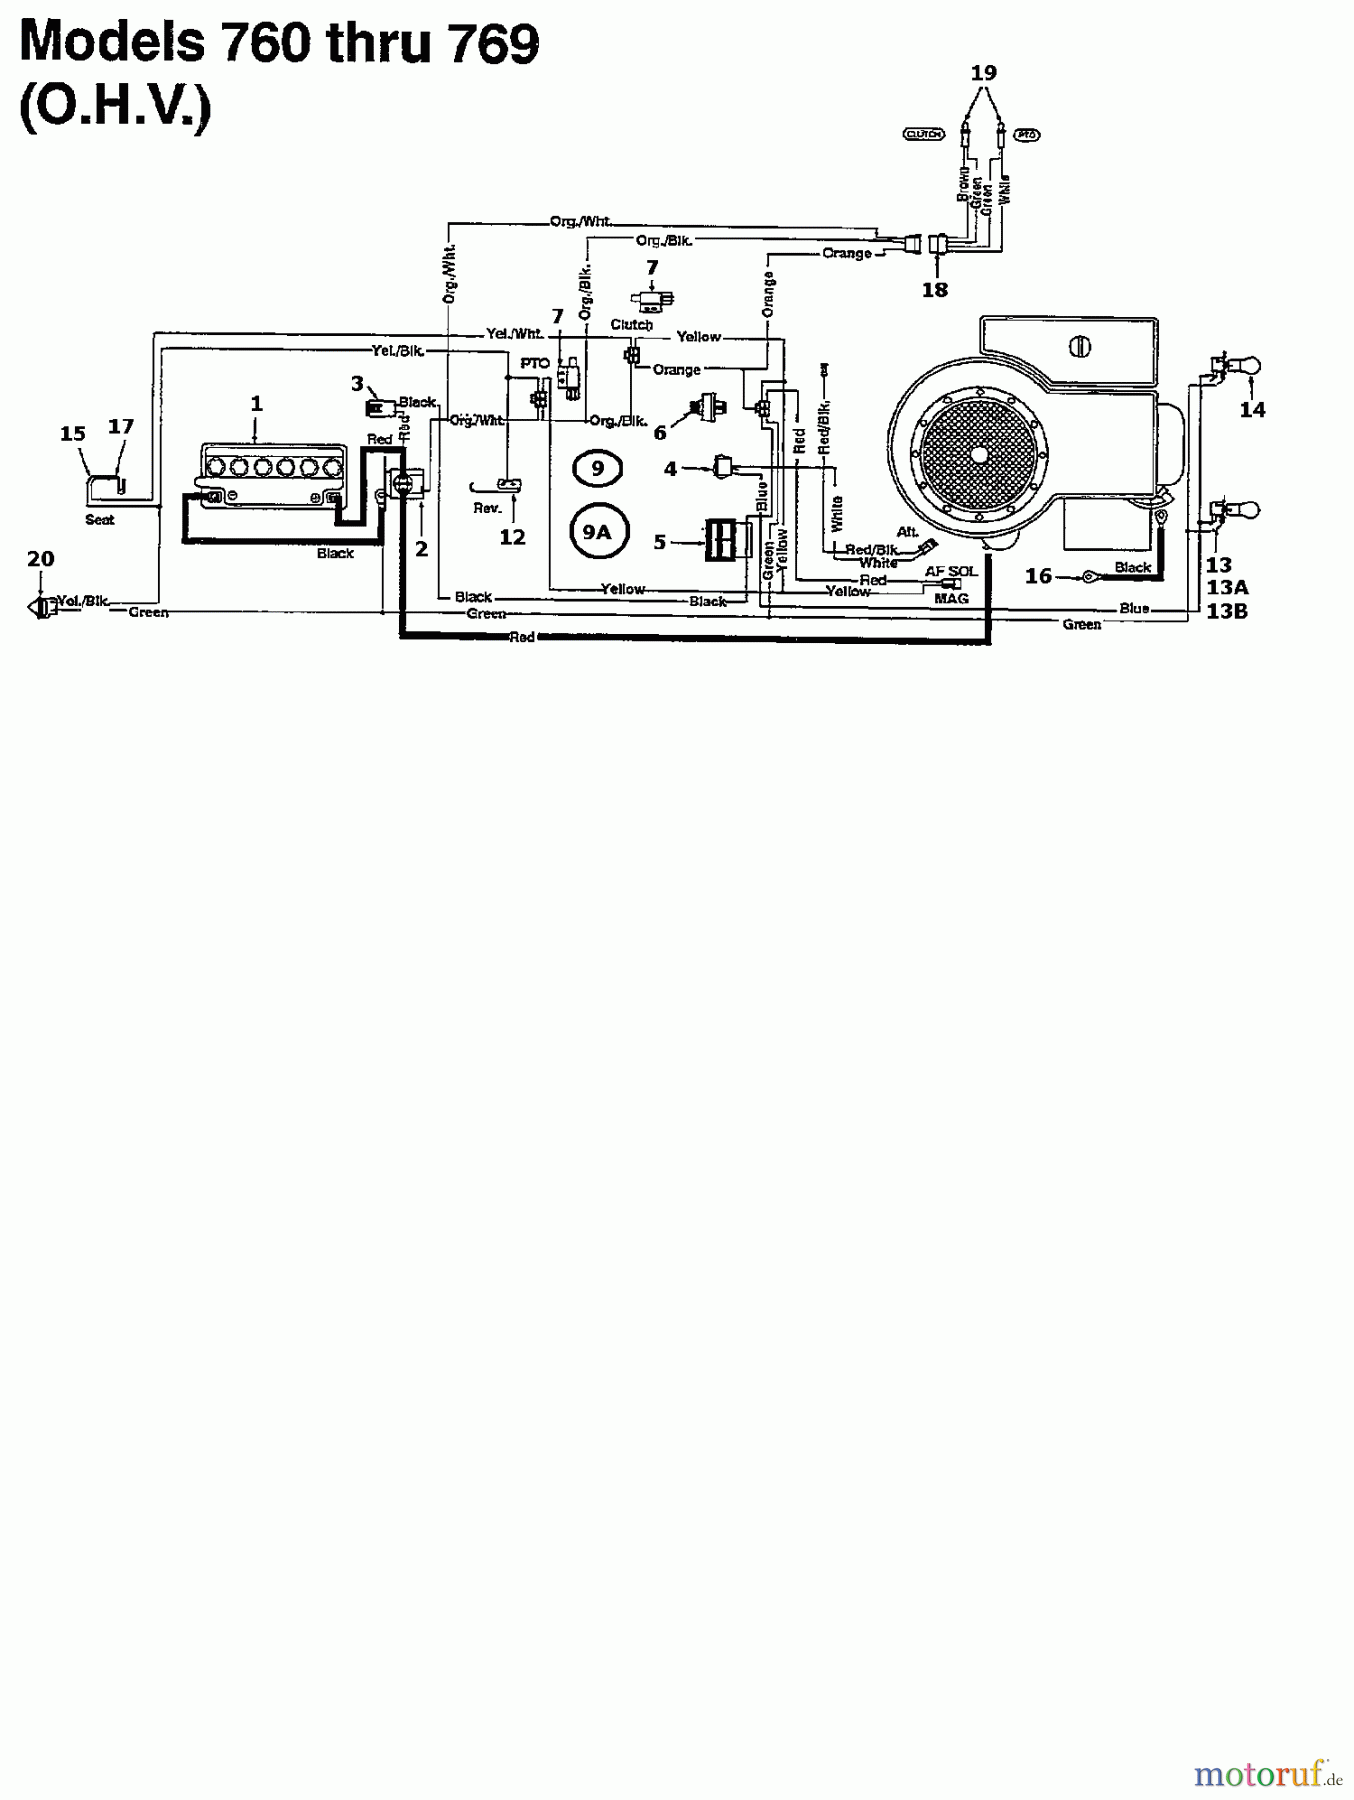  Agria Lawn tractors 4600/102 H 135N769N609  (1995) Wiring diagram for O.H.V.